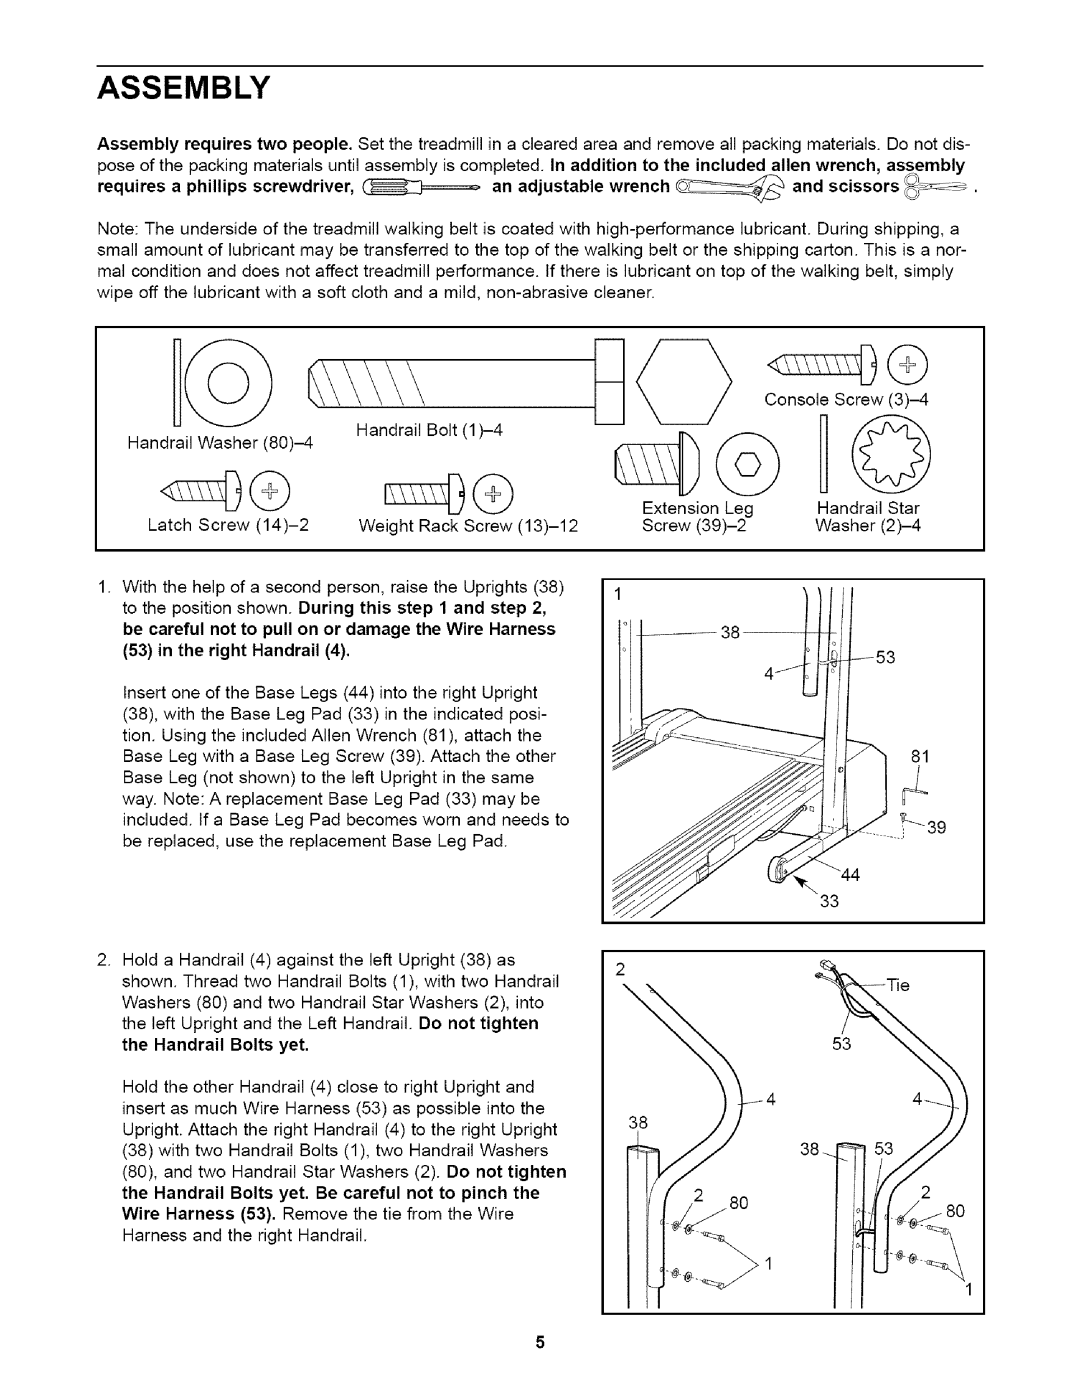 Weslo WLTL29010 user manual Assembly, requires a phillips screwdriver, ========, an adjustable wrench, and scissors 